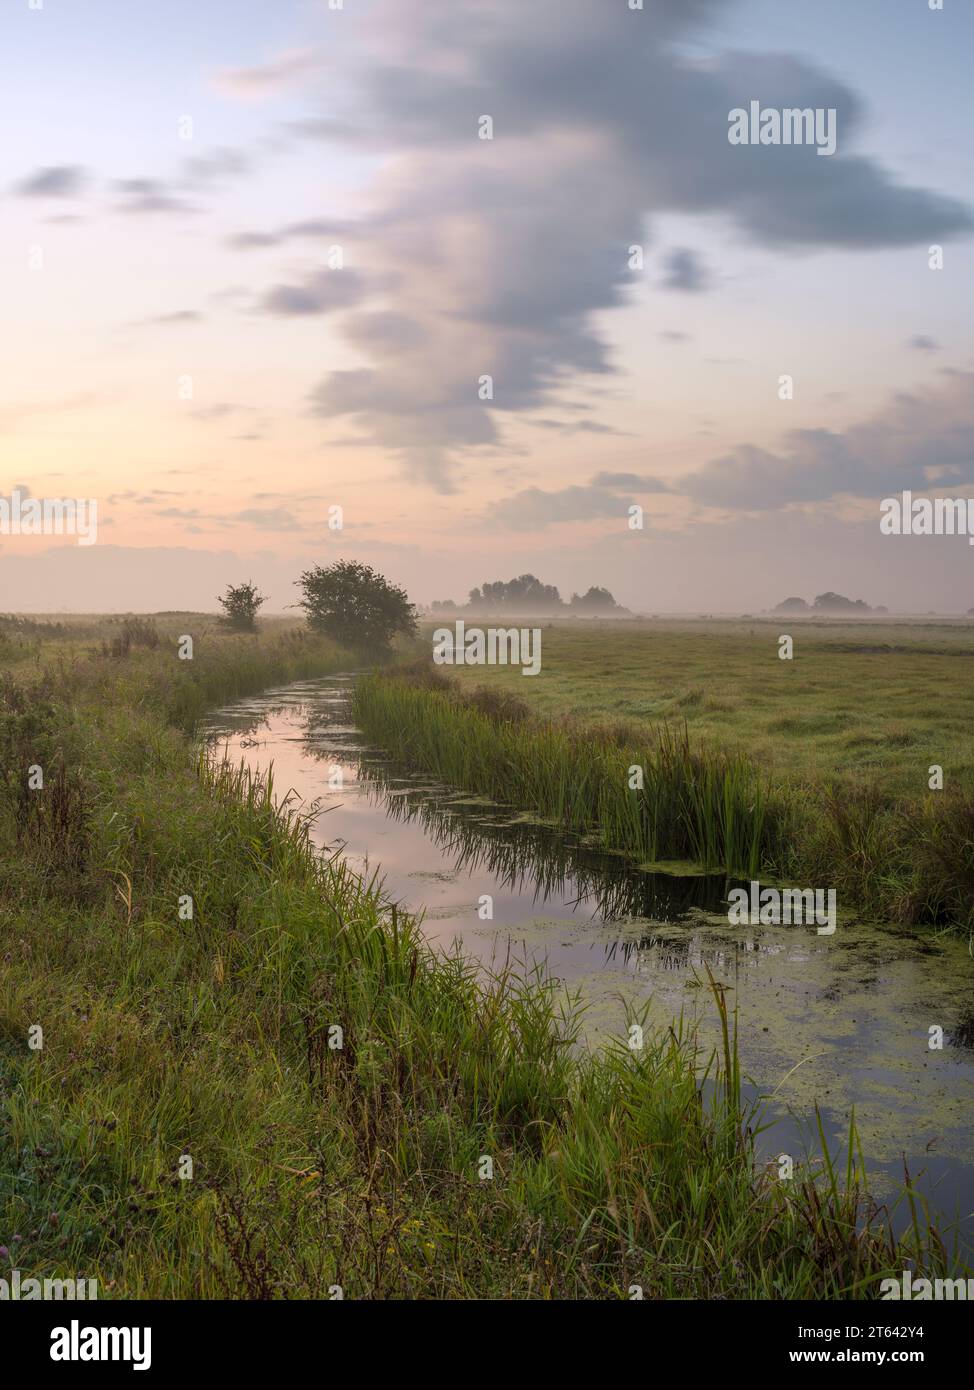 The clouds echoing the shaoe of the river on a misty morning on the Halvergate Marshes near Great Yarmouth, Norfolk. Stock Photo